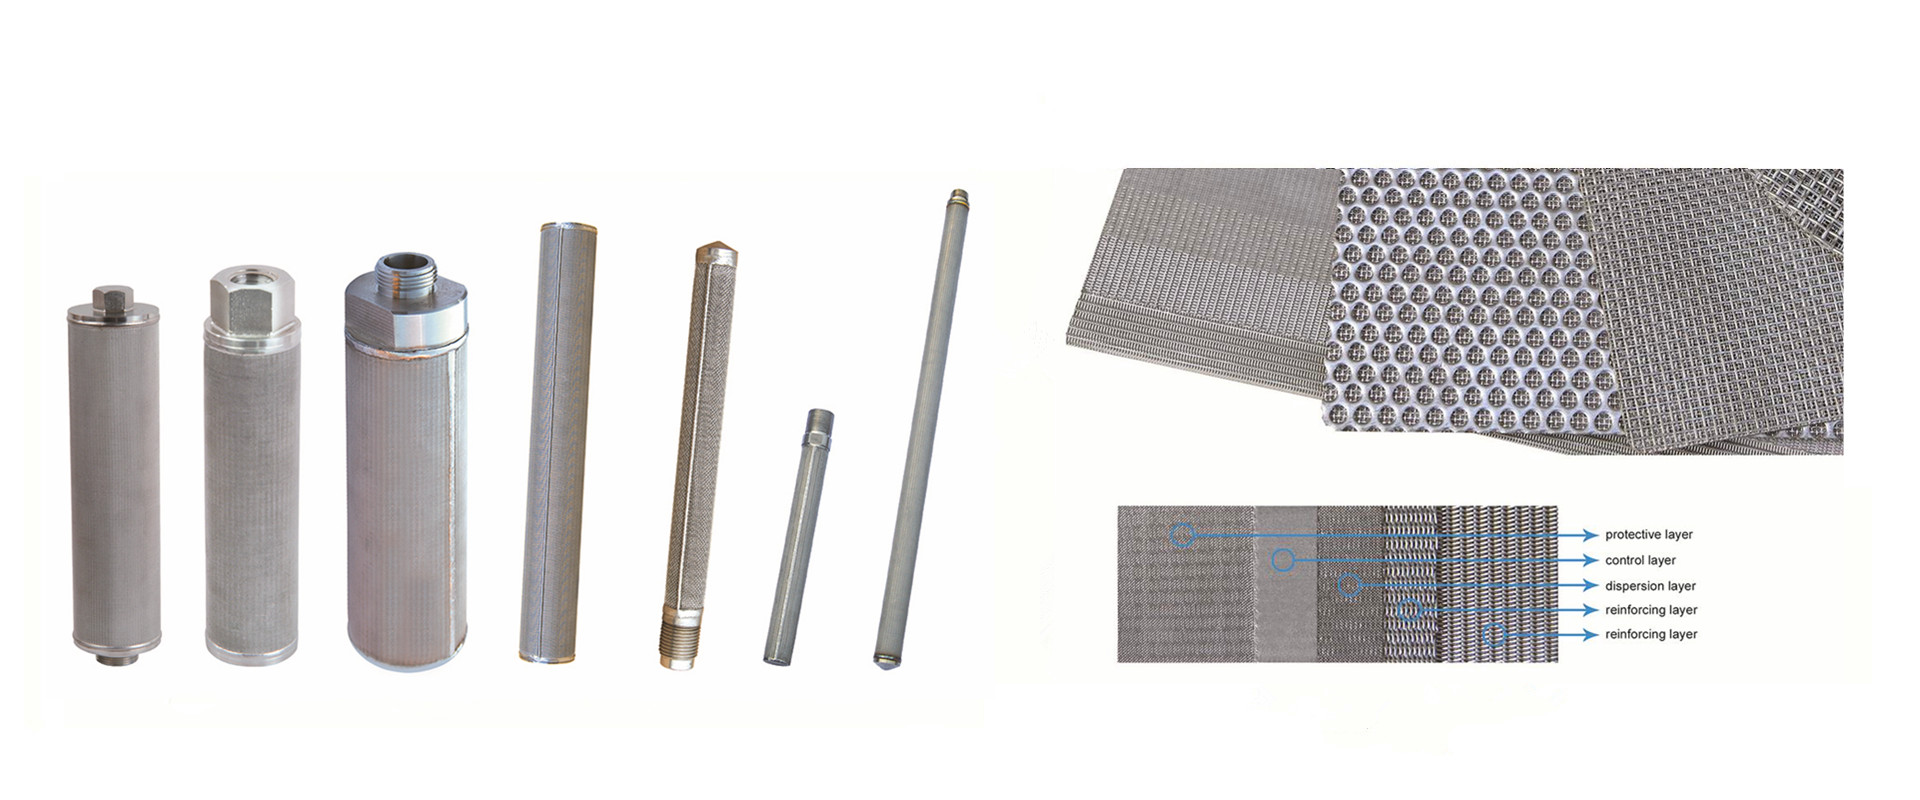 Featured products:Sintered candle filters,hydraulic cartridge filters 